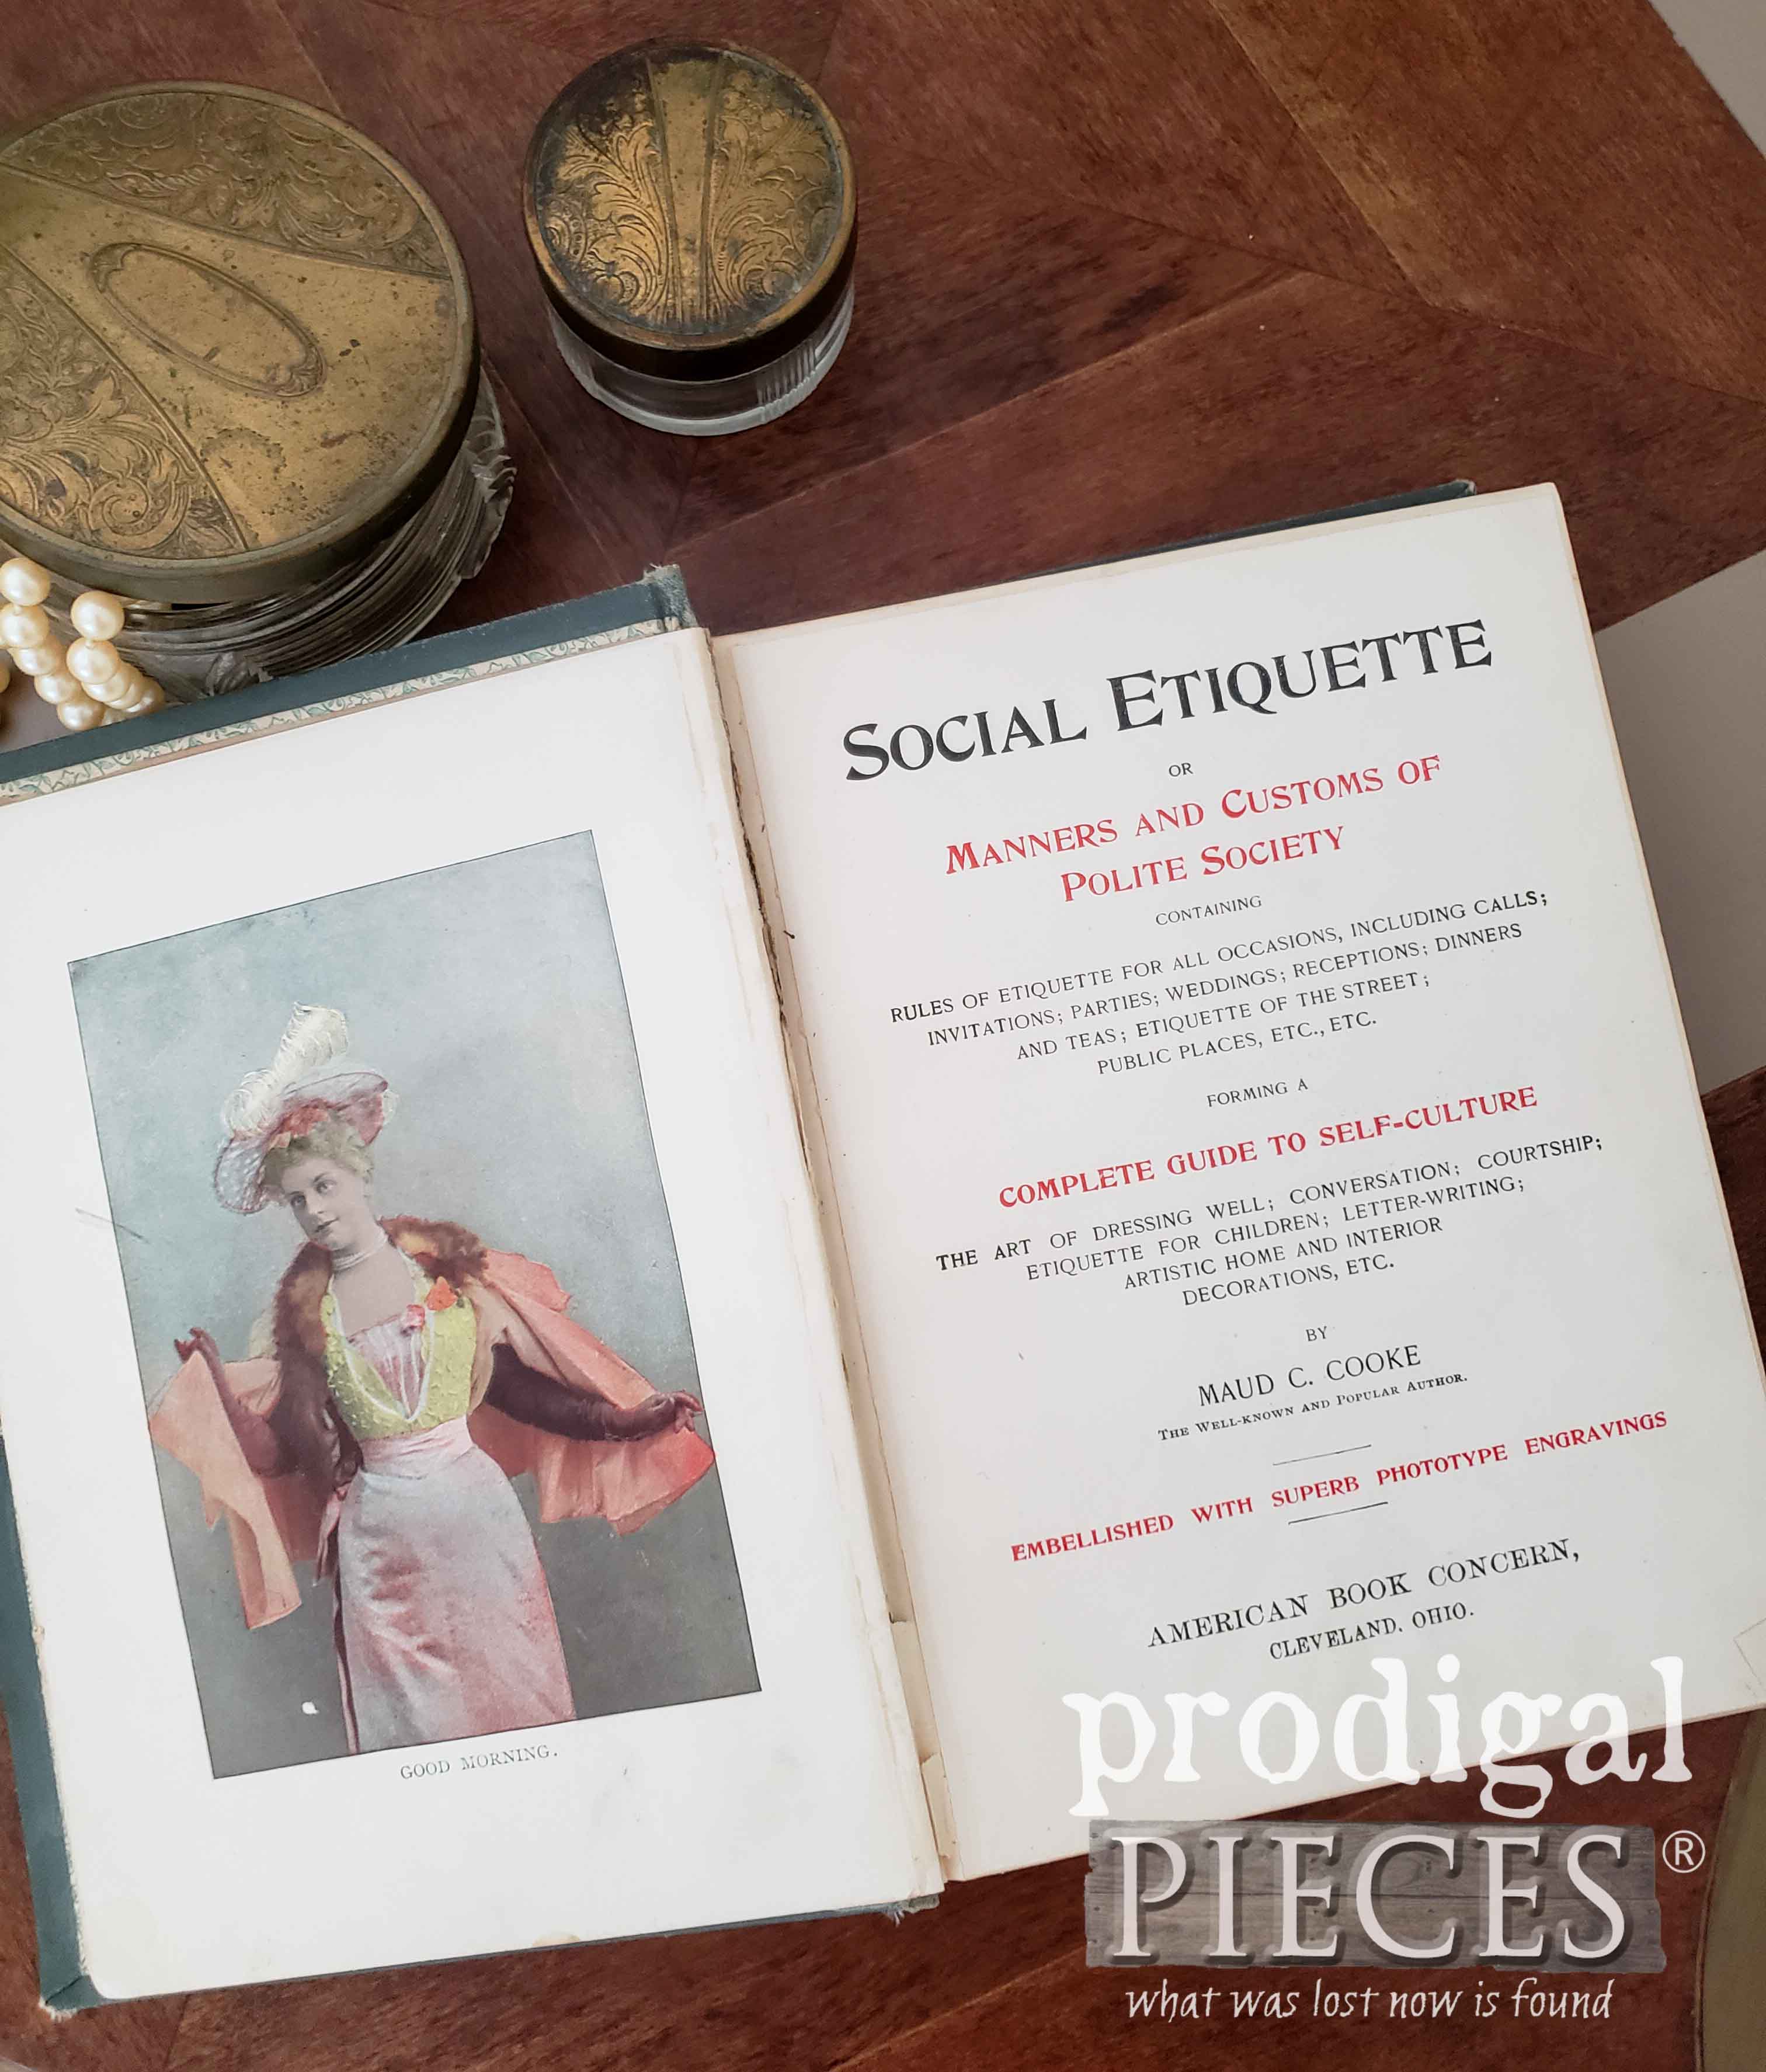 Beautiful Antique Book of Social Etiquette found in trash by Larissa of Prodigal Pieces | prodigalpieces.com